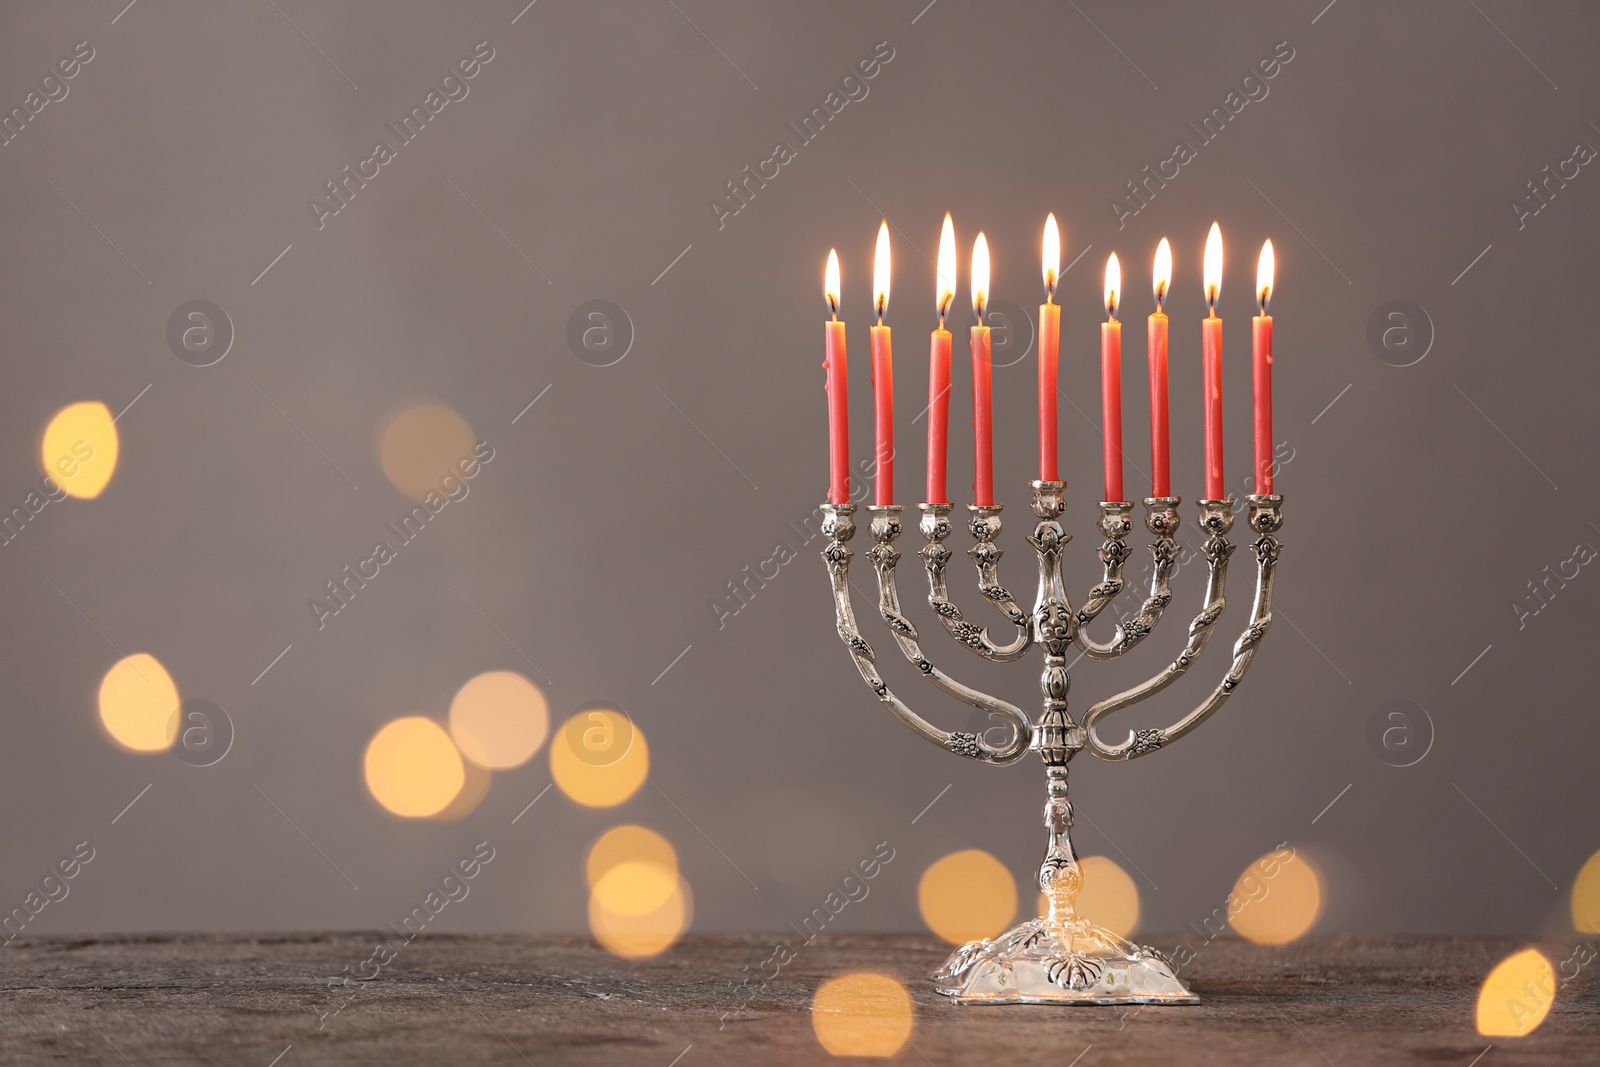 Photo of Silver menorah with burning candles on table against grey background and blurred festive lights, space for text. Hanukkah celebration